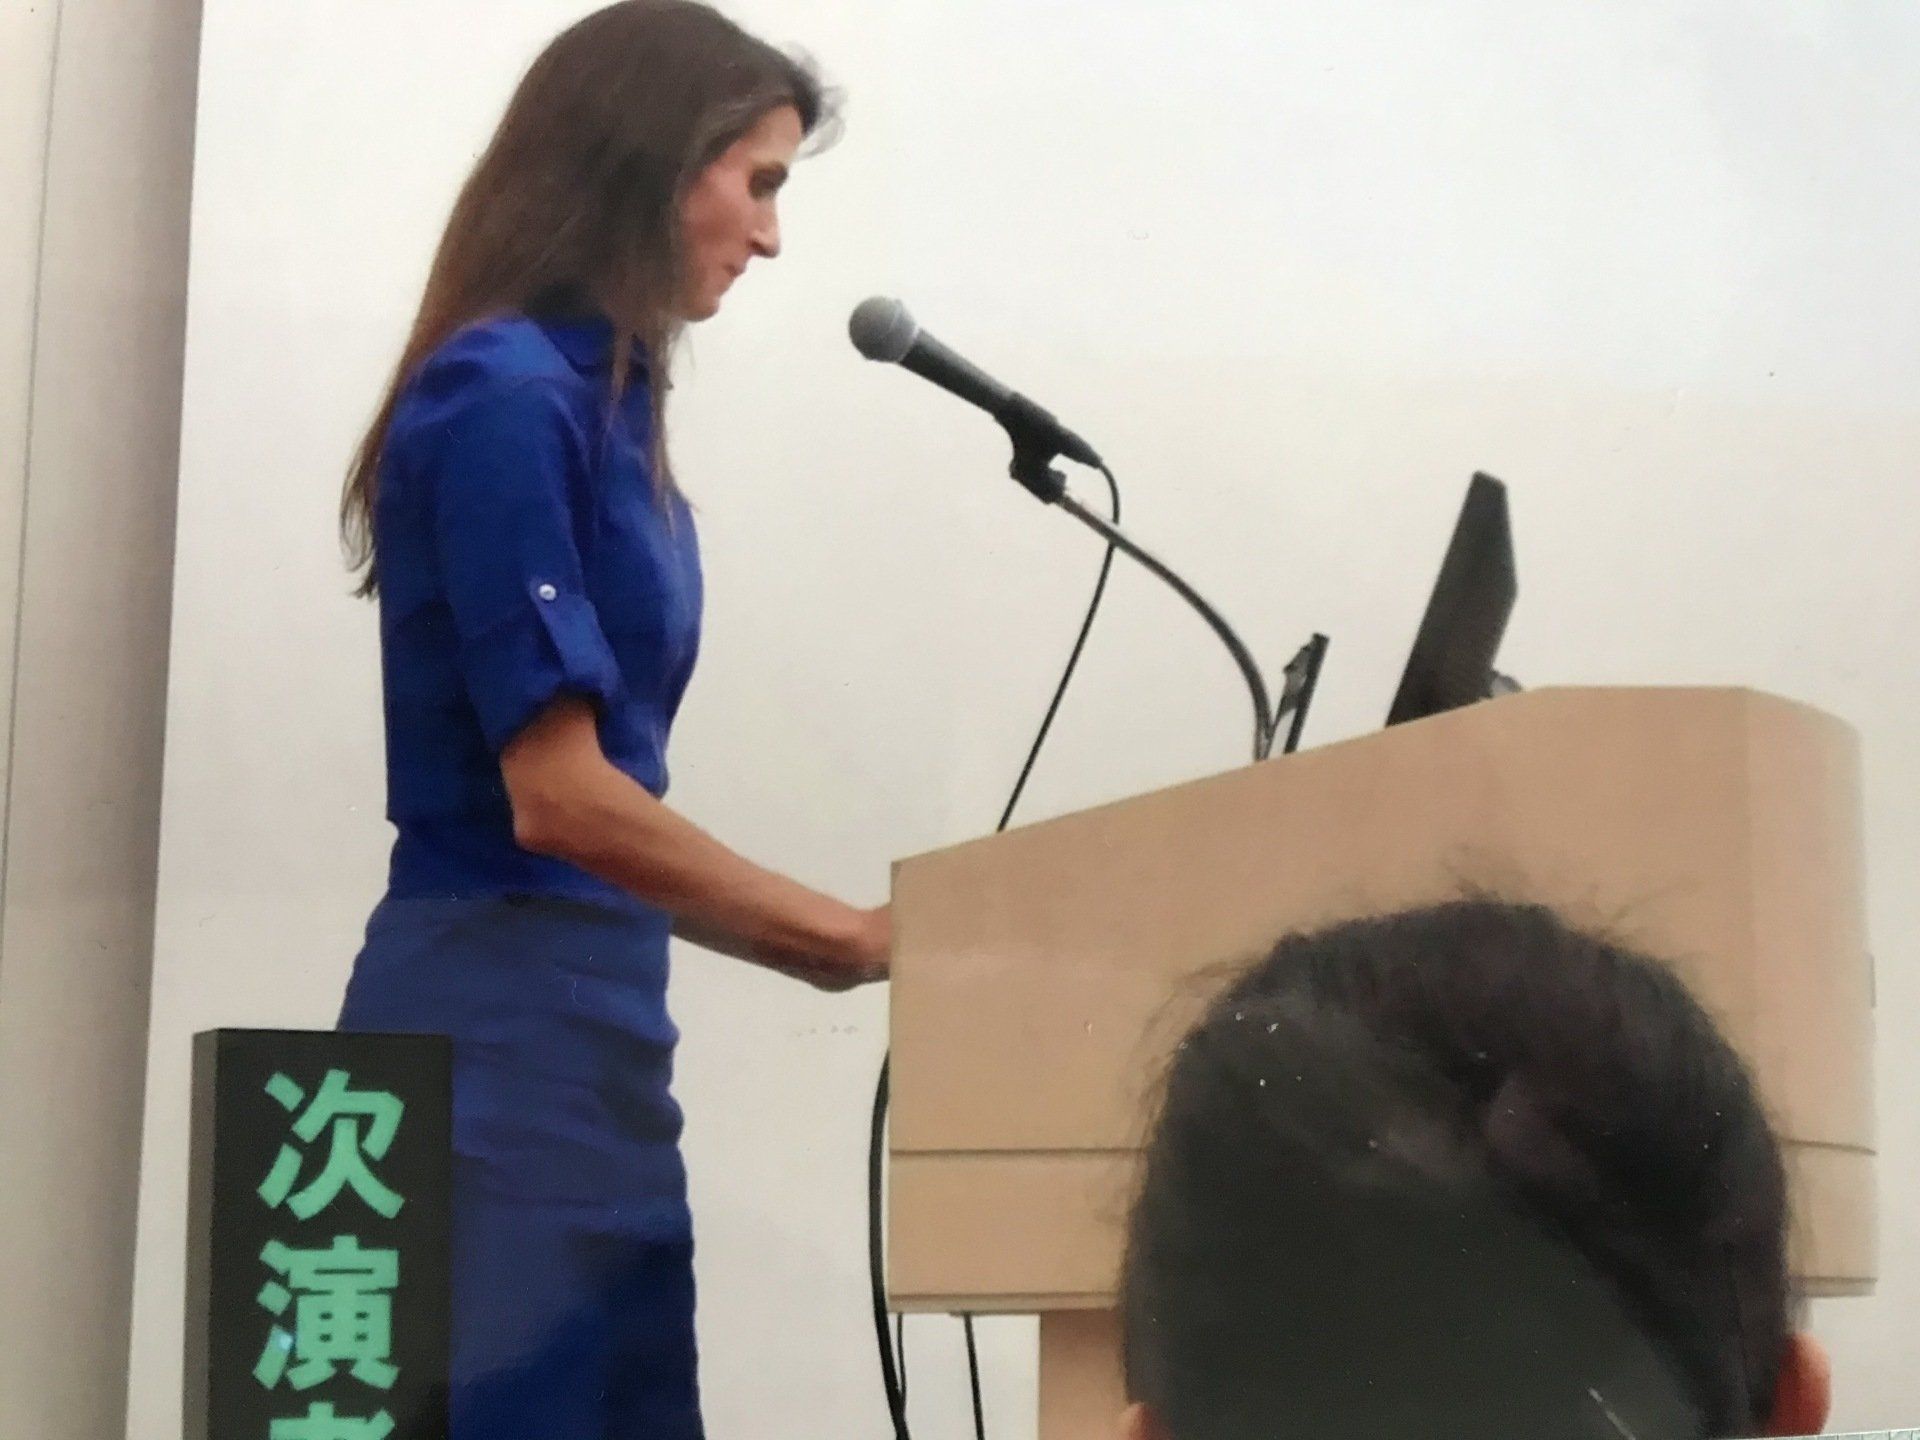 Dr. Beth Frates lecturing on health coaching in Tokyo and Yokohama Japan in 2012.